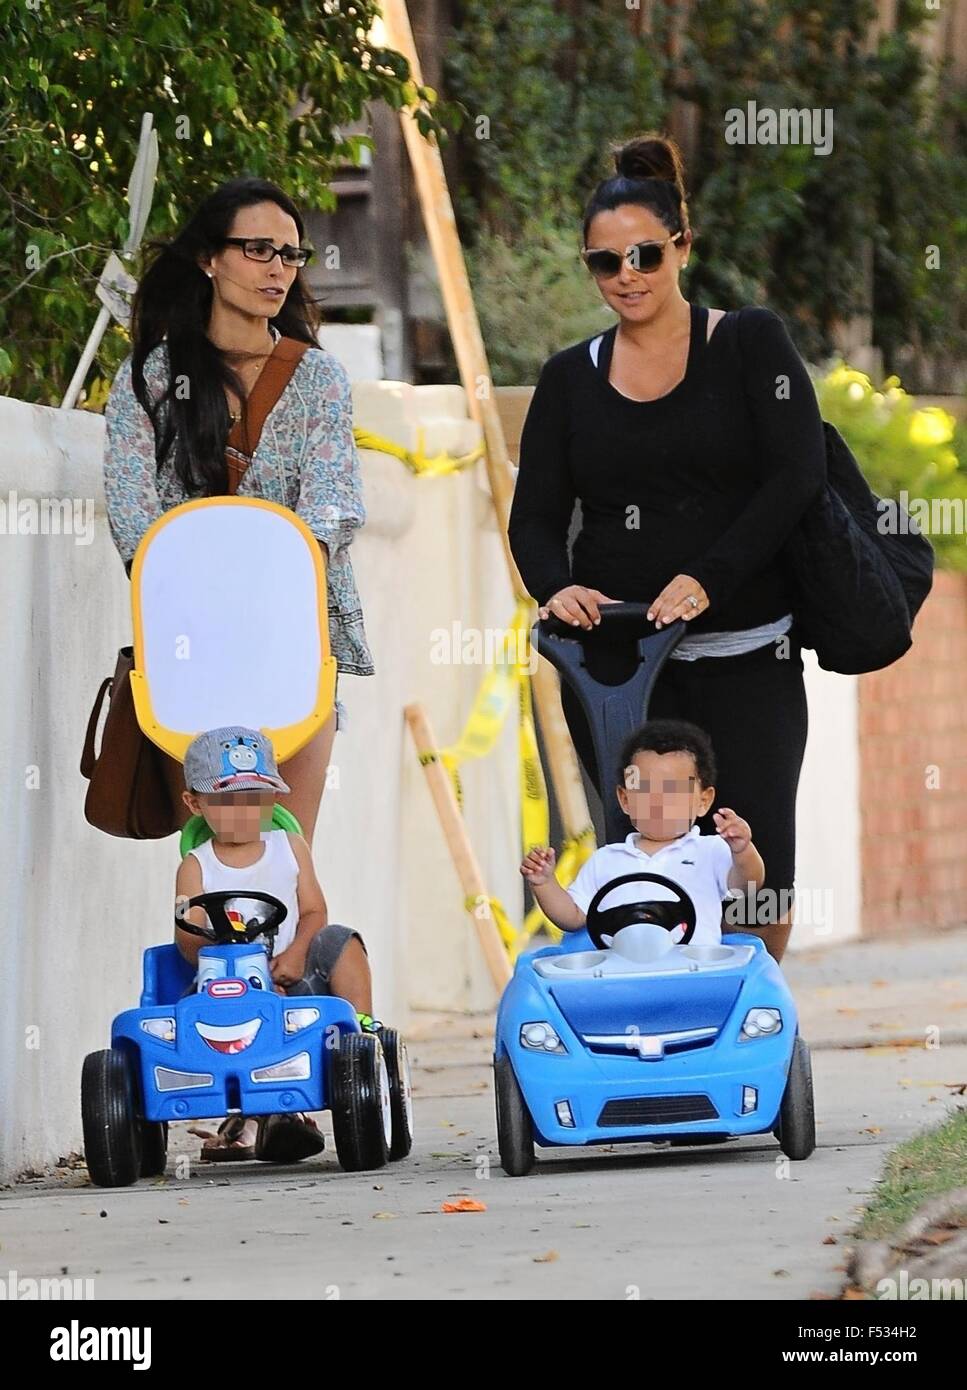 Jordana Brewster and her sister Isabella Brewster out with their children  in Brentwood, Los Angeles Featuring: Jordana Brewster, Isabella Brewster,  Julian Form-Brewster Where: Los Angeles, California, United States When: 25  Aug 2015